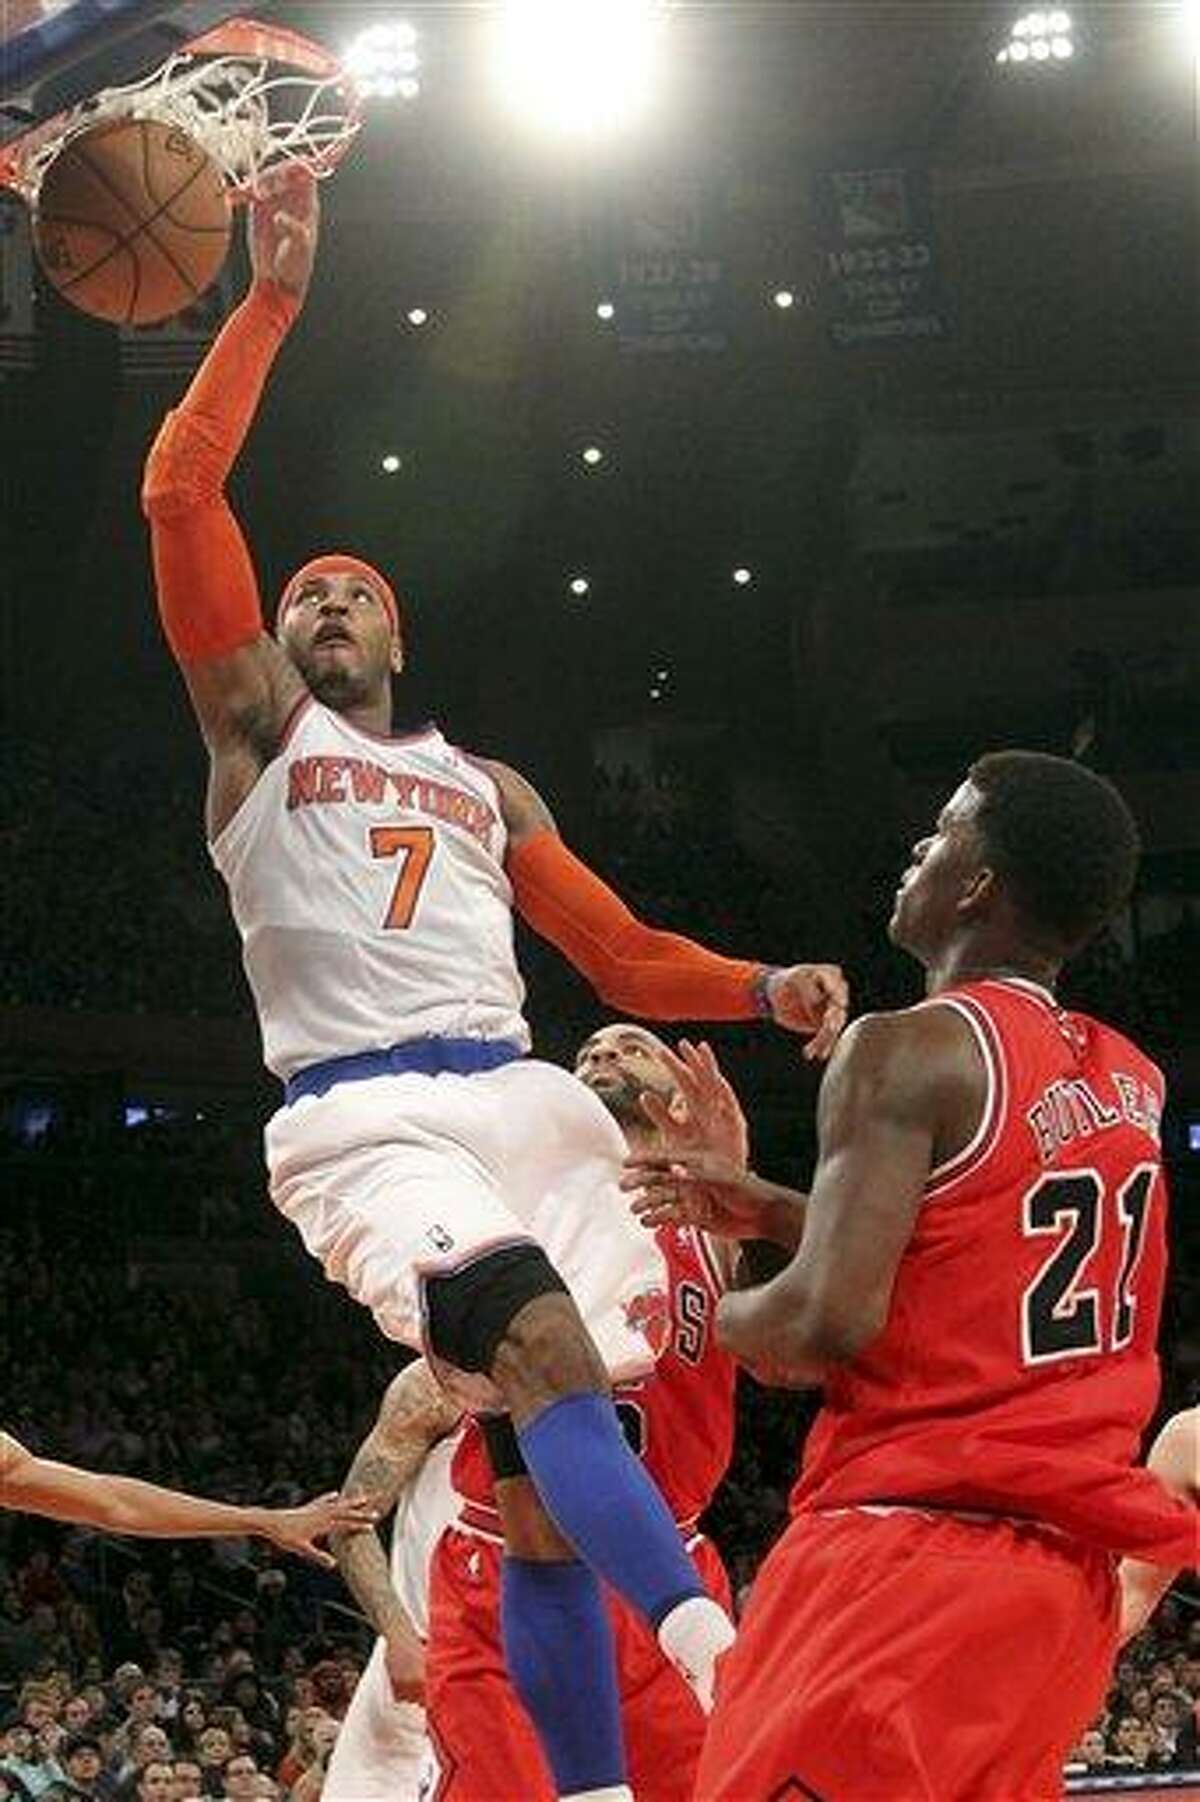 Chicago Bulls' Jimmy Butler (21) watches as New York Knicks' Carmelo Anthony scores a basket during the first half of an NBA basketball game on Friday, Dec. 21, 2012, at Madison Square Garden in New York. (AP Photo/Mary Altaffer)